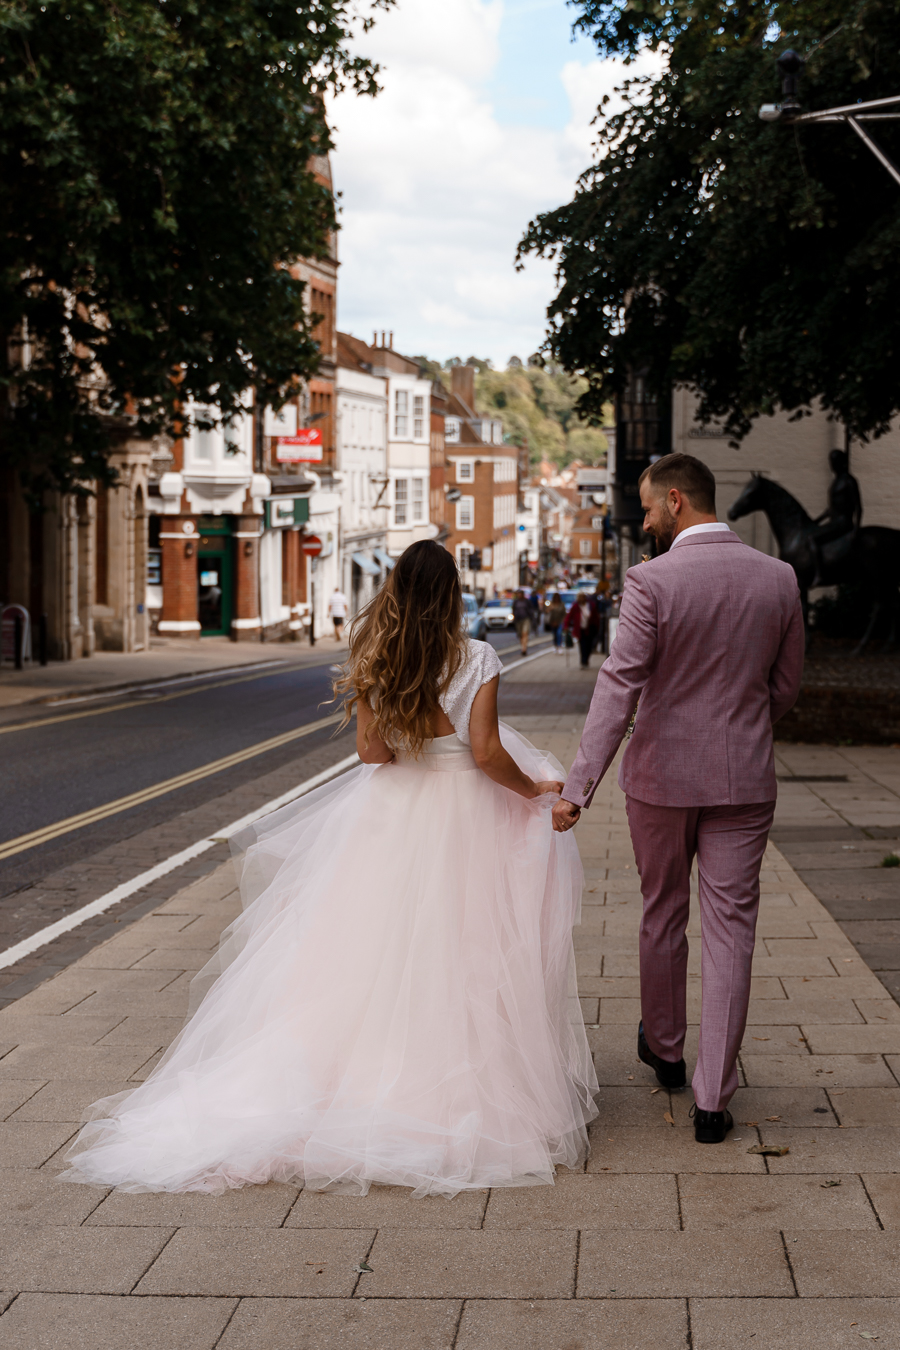 A loved-up Winchester city elopement - with adorable dogs! Photographer credit Katherine and her Camera (26)